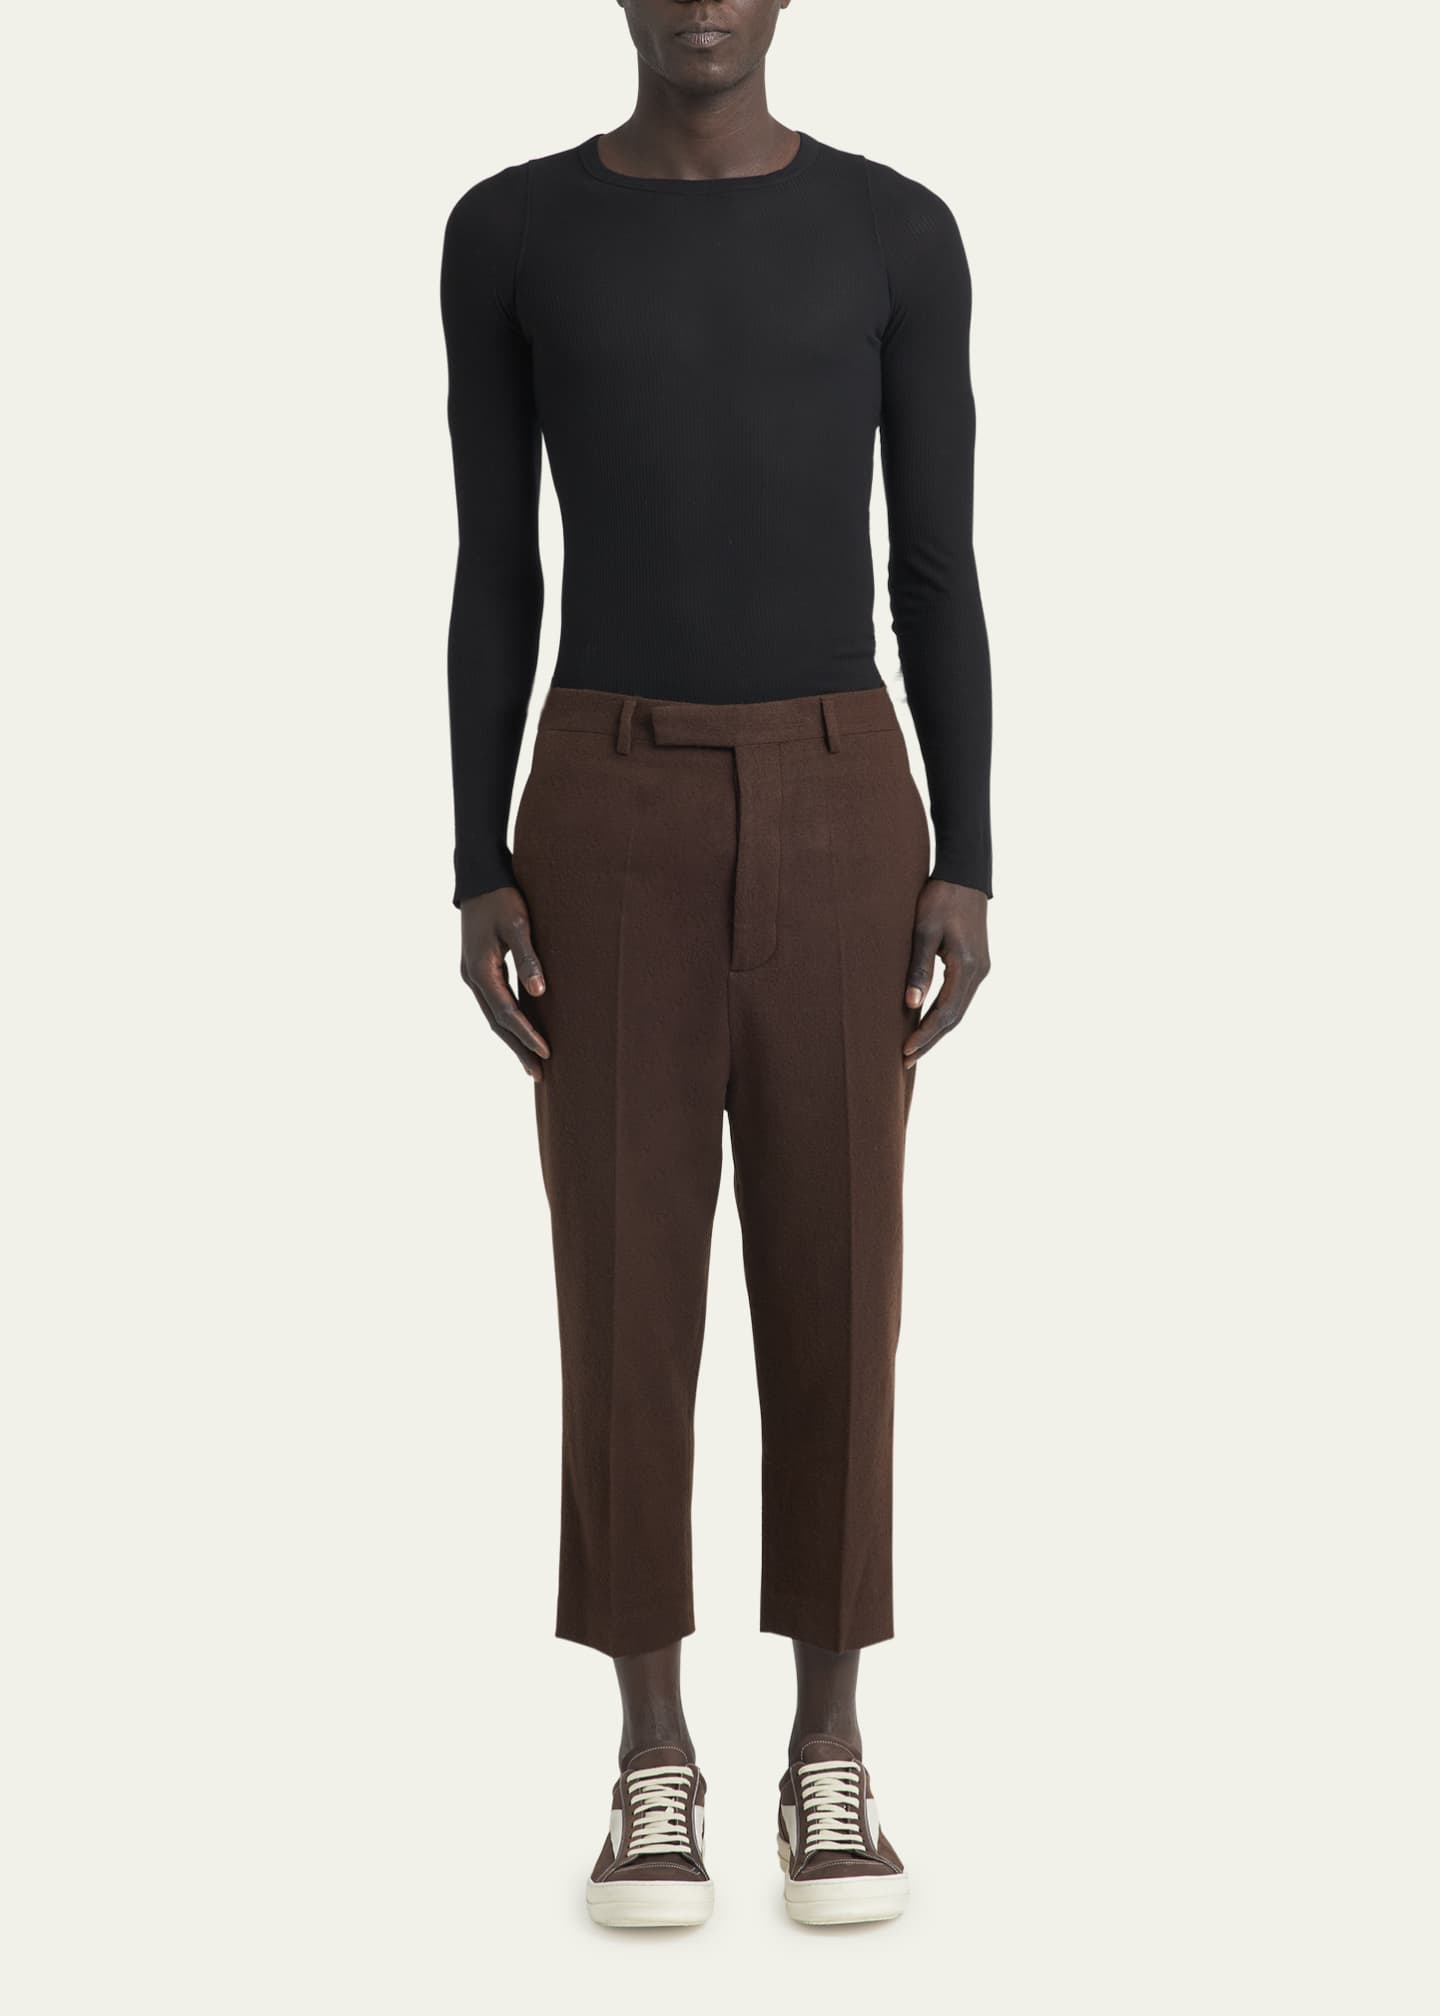 Rick Owens Men's Astaire Cropped Wool Pants